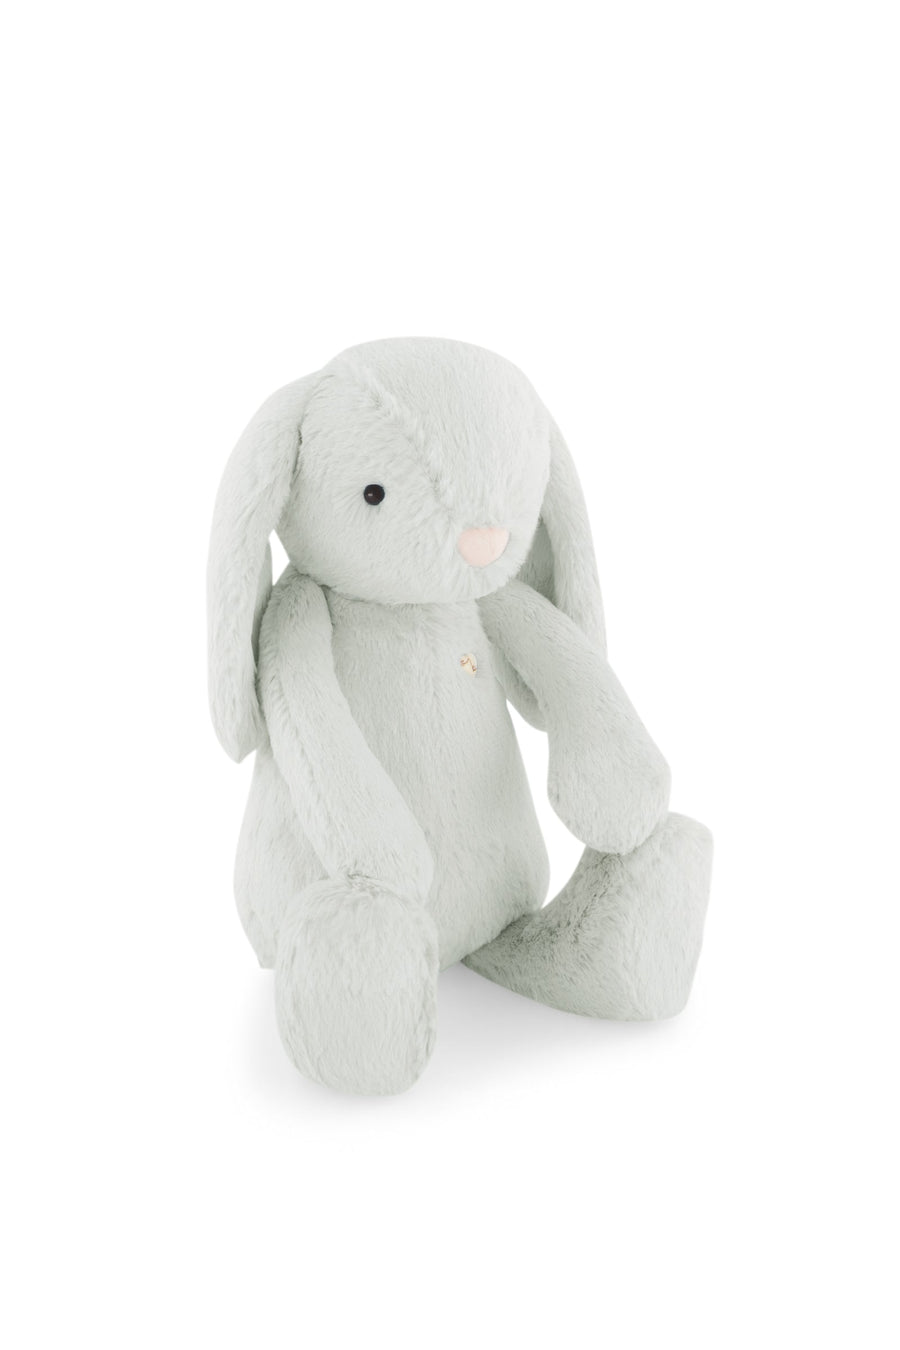 Snuggle Bunnies - Penelope the Bunny - Willow Childrens Toy from Jamie Kay NZ